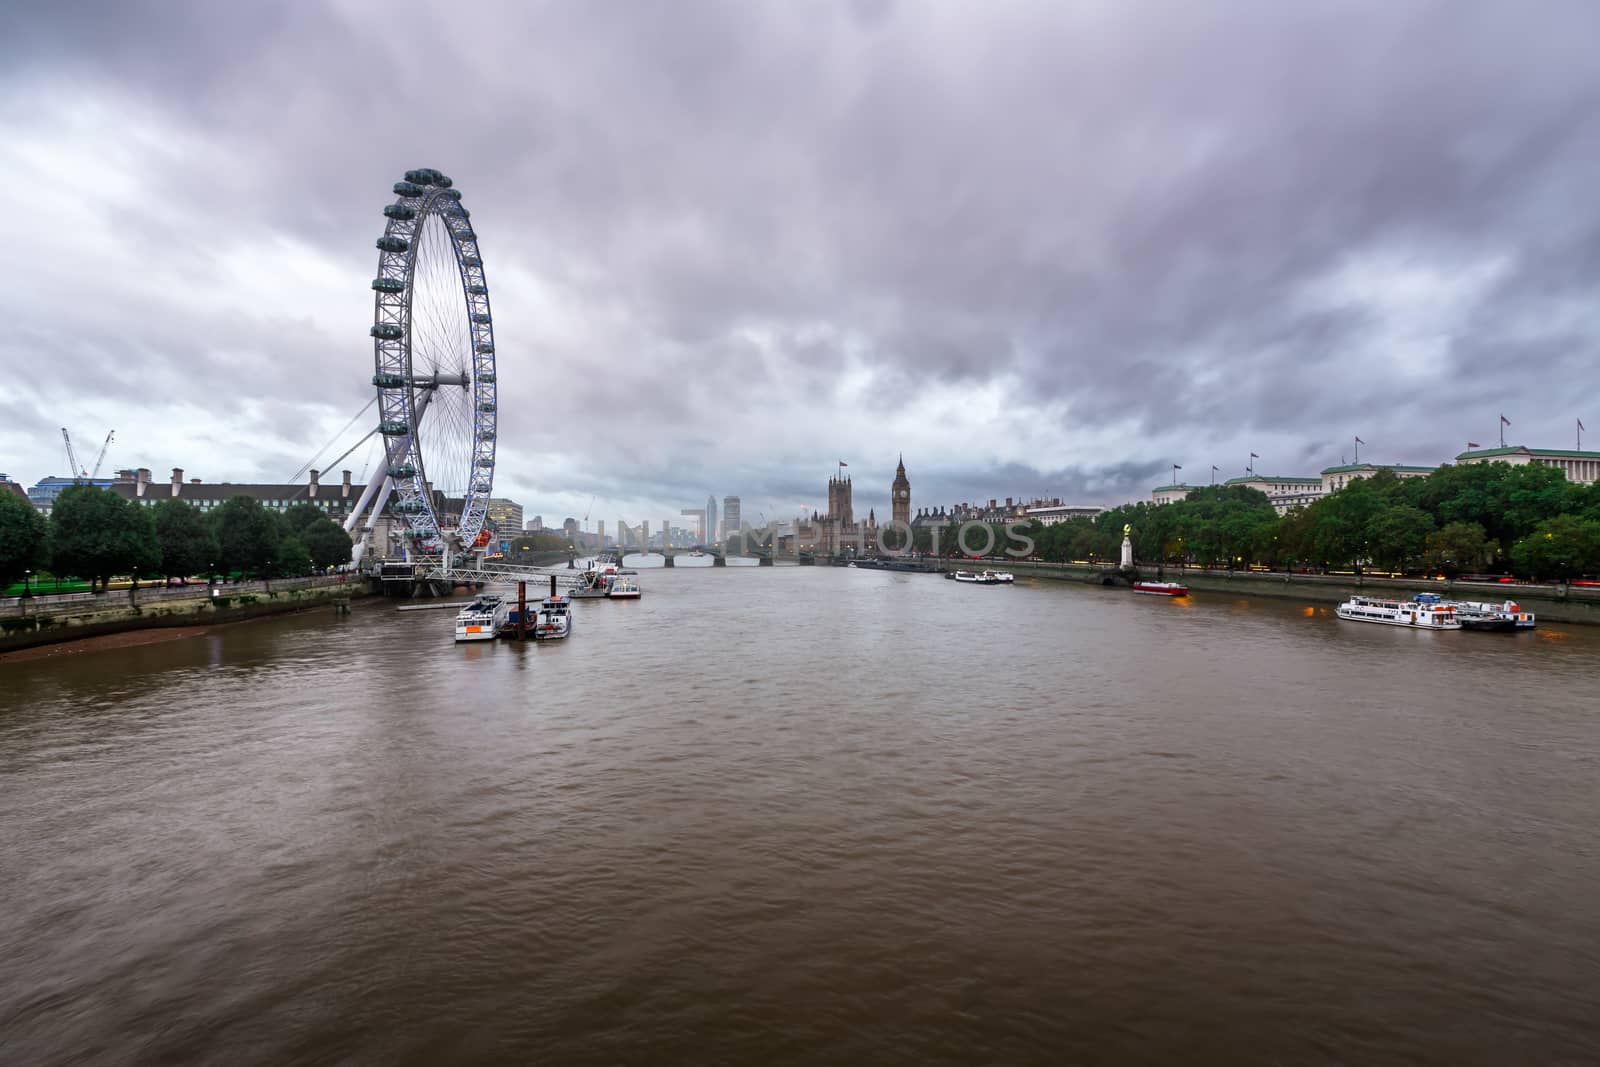 Rainy Weather over River Thames, Westminster Palace and London S by anshar